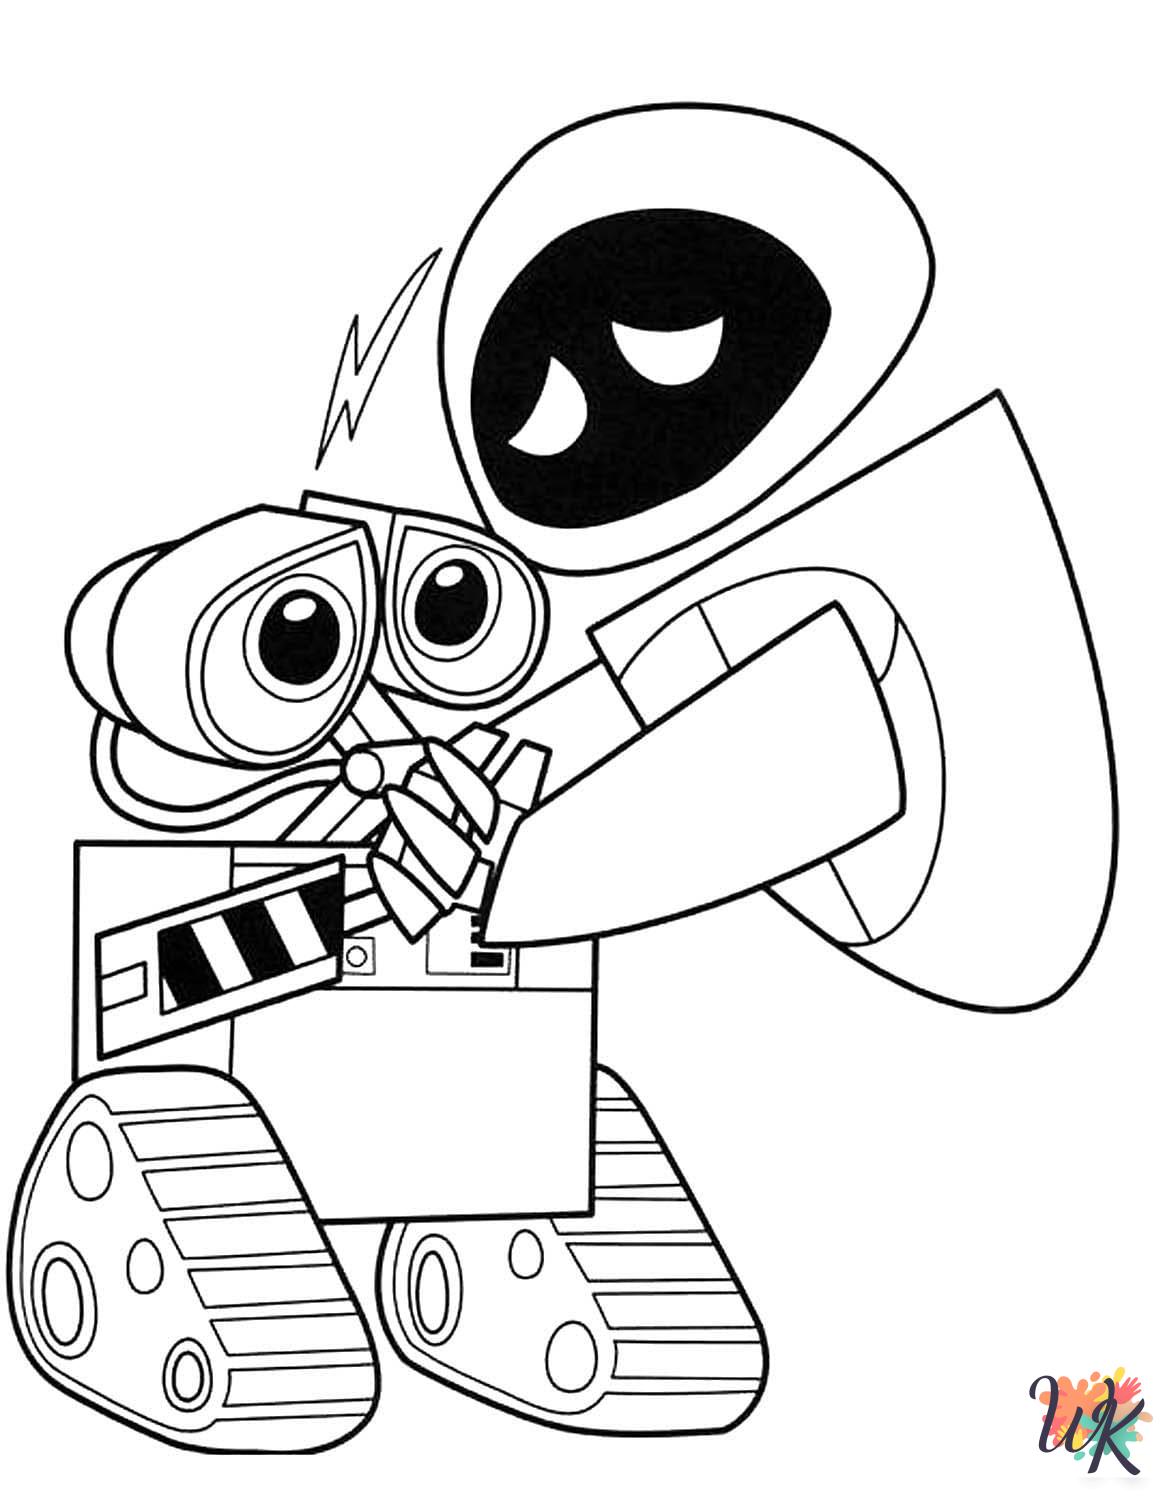 old-fashioned WALL-E coloring pages